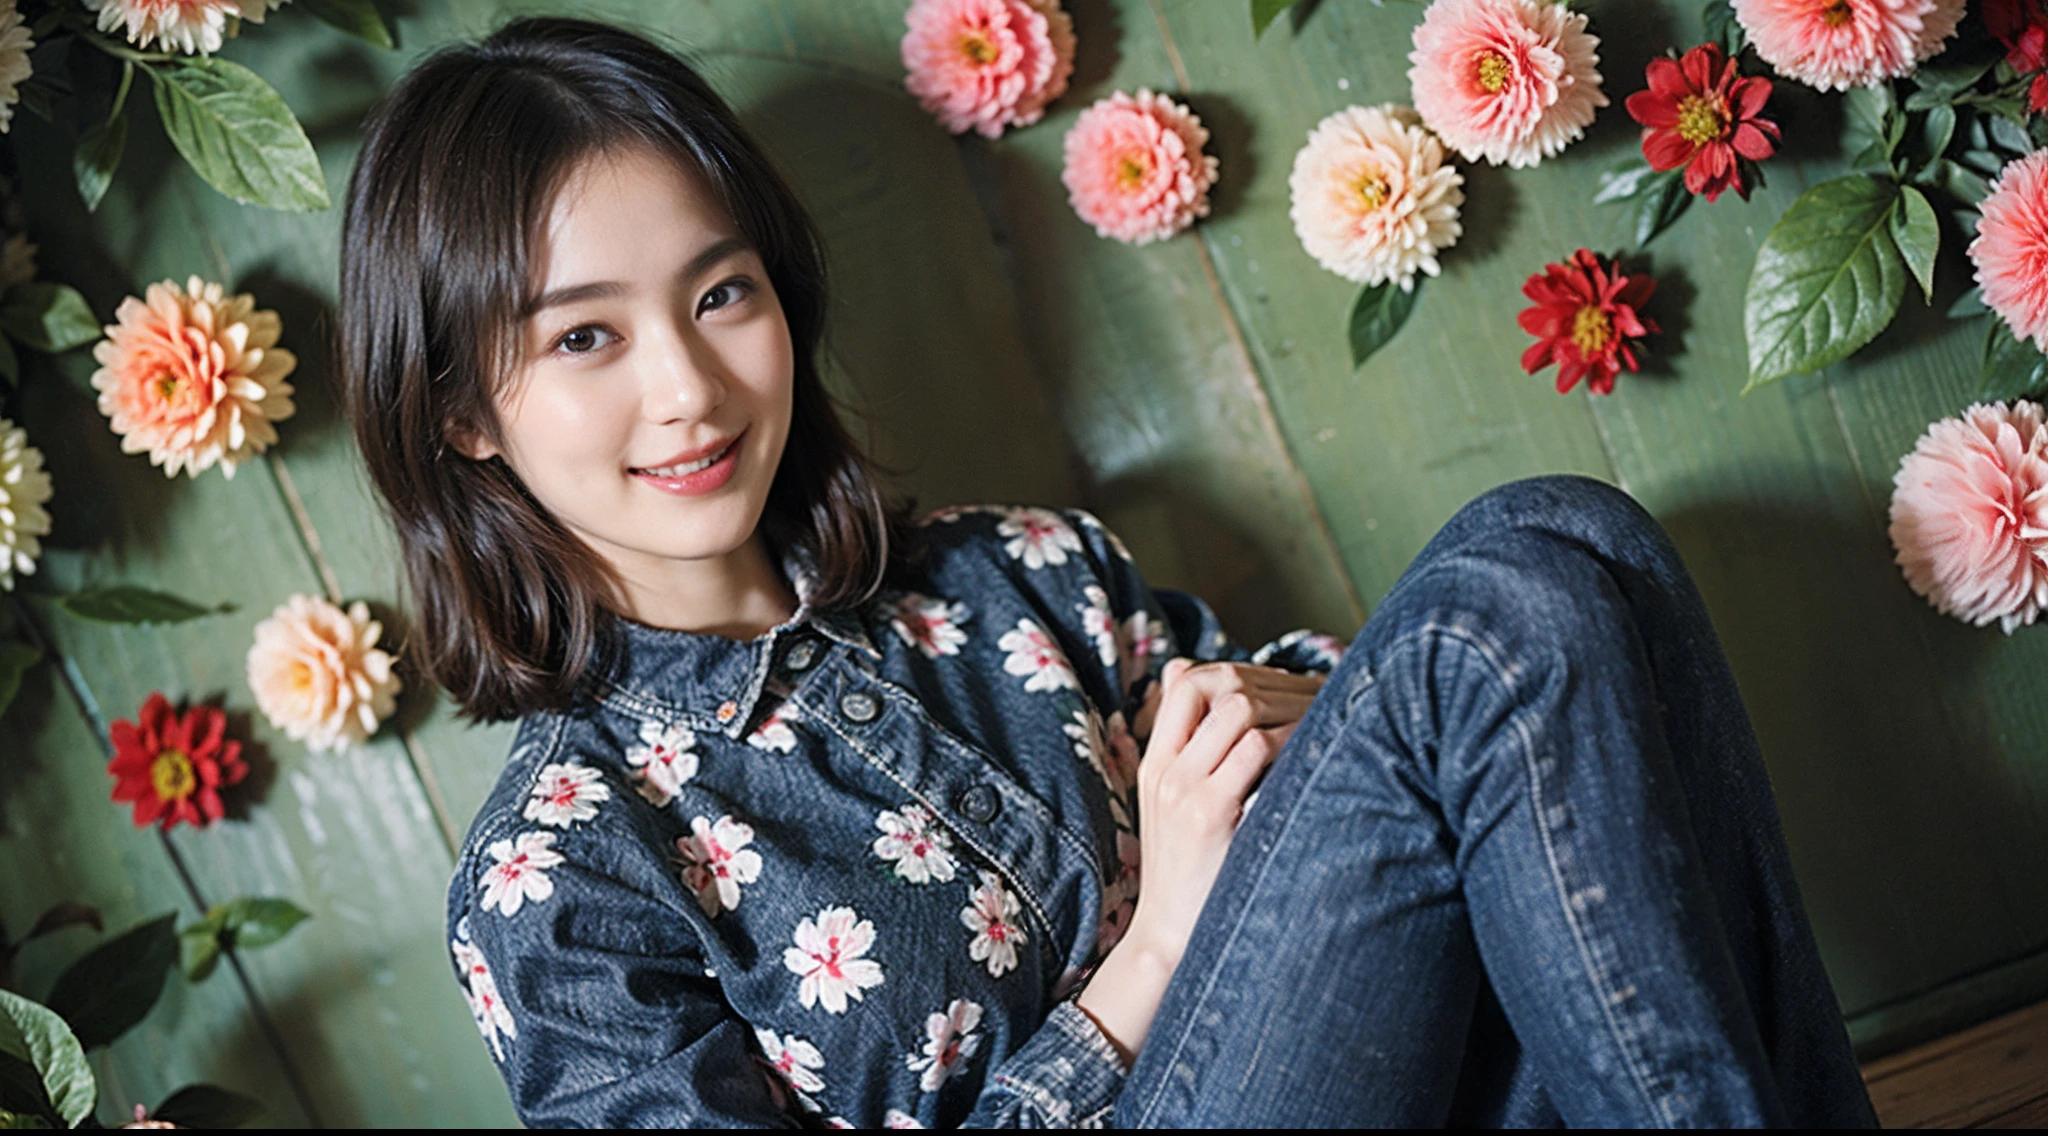 (masutepiece)、((High-quality photos))、ultra-detailliert、((1beautiful woman))、((Jeans - Wear jeans))、((Long sleeve shirt with floral pattern))、((Black Shorthair))、((A slight smil)))、((Breast))、paprika